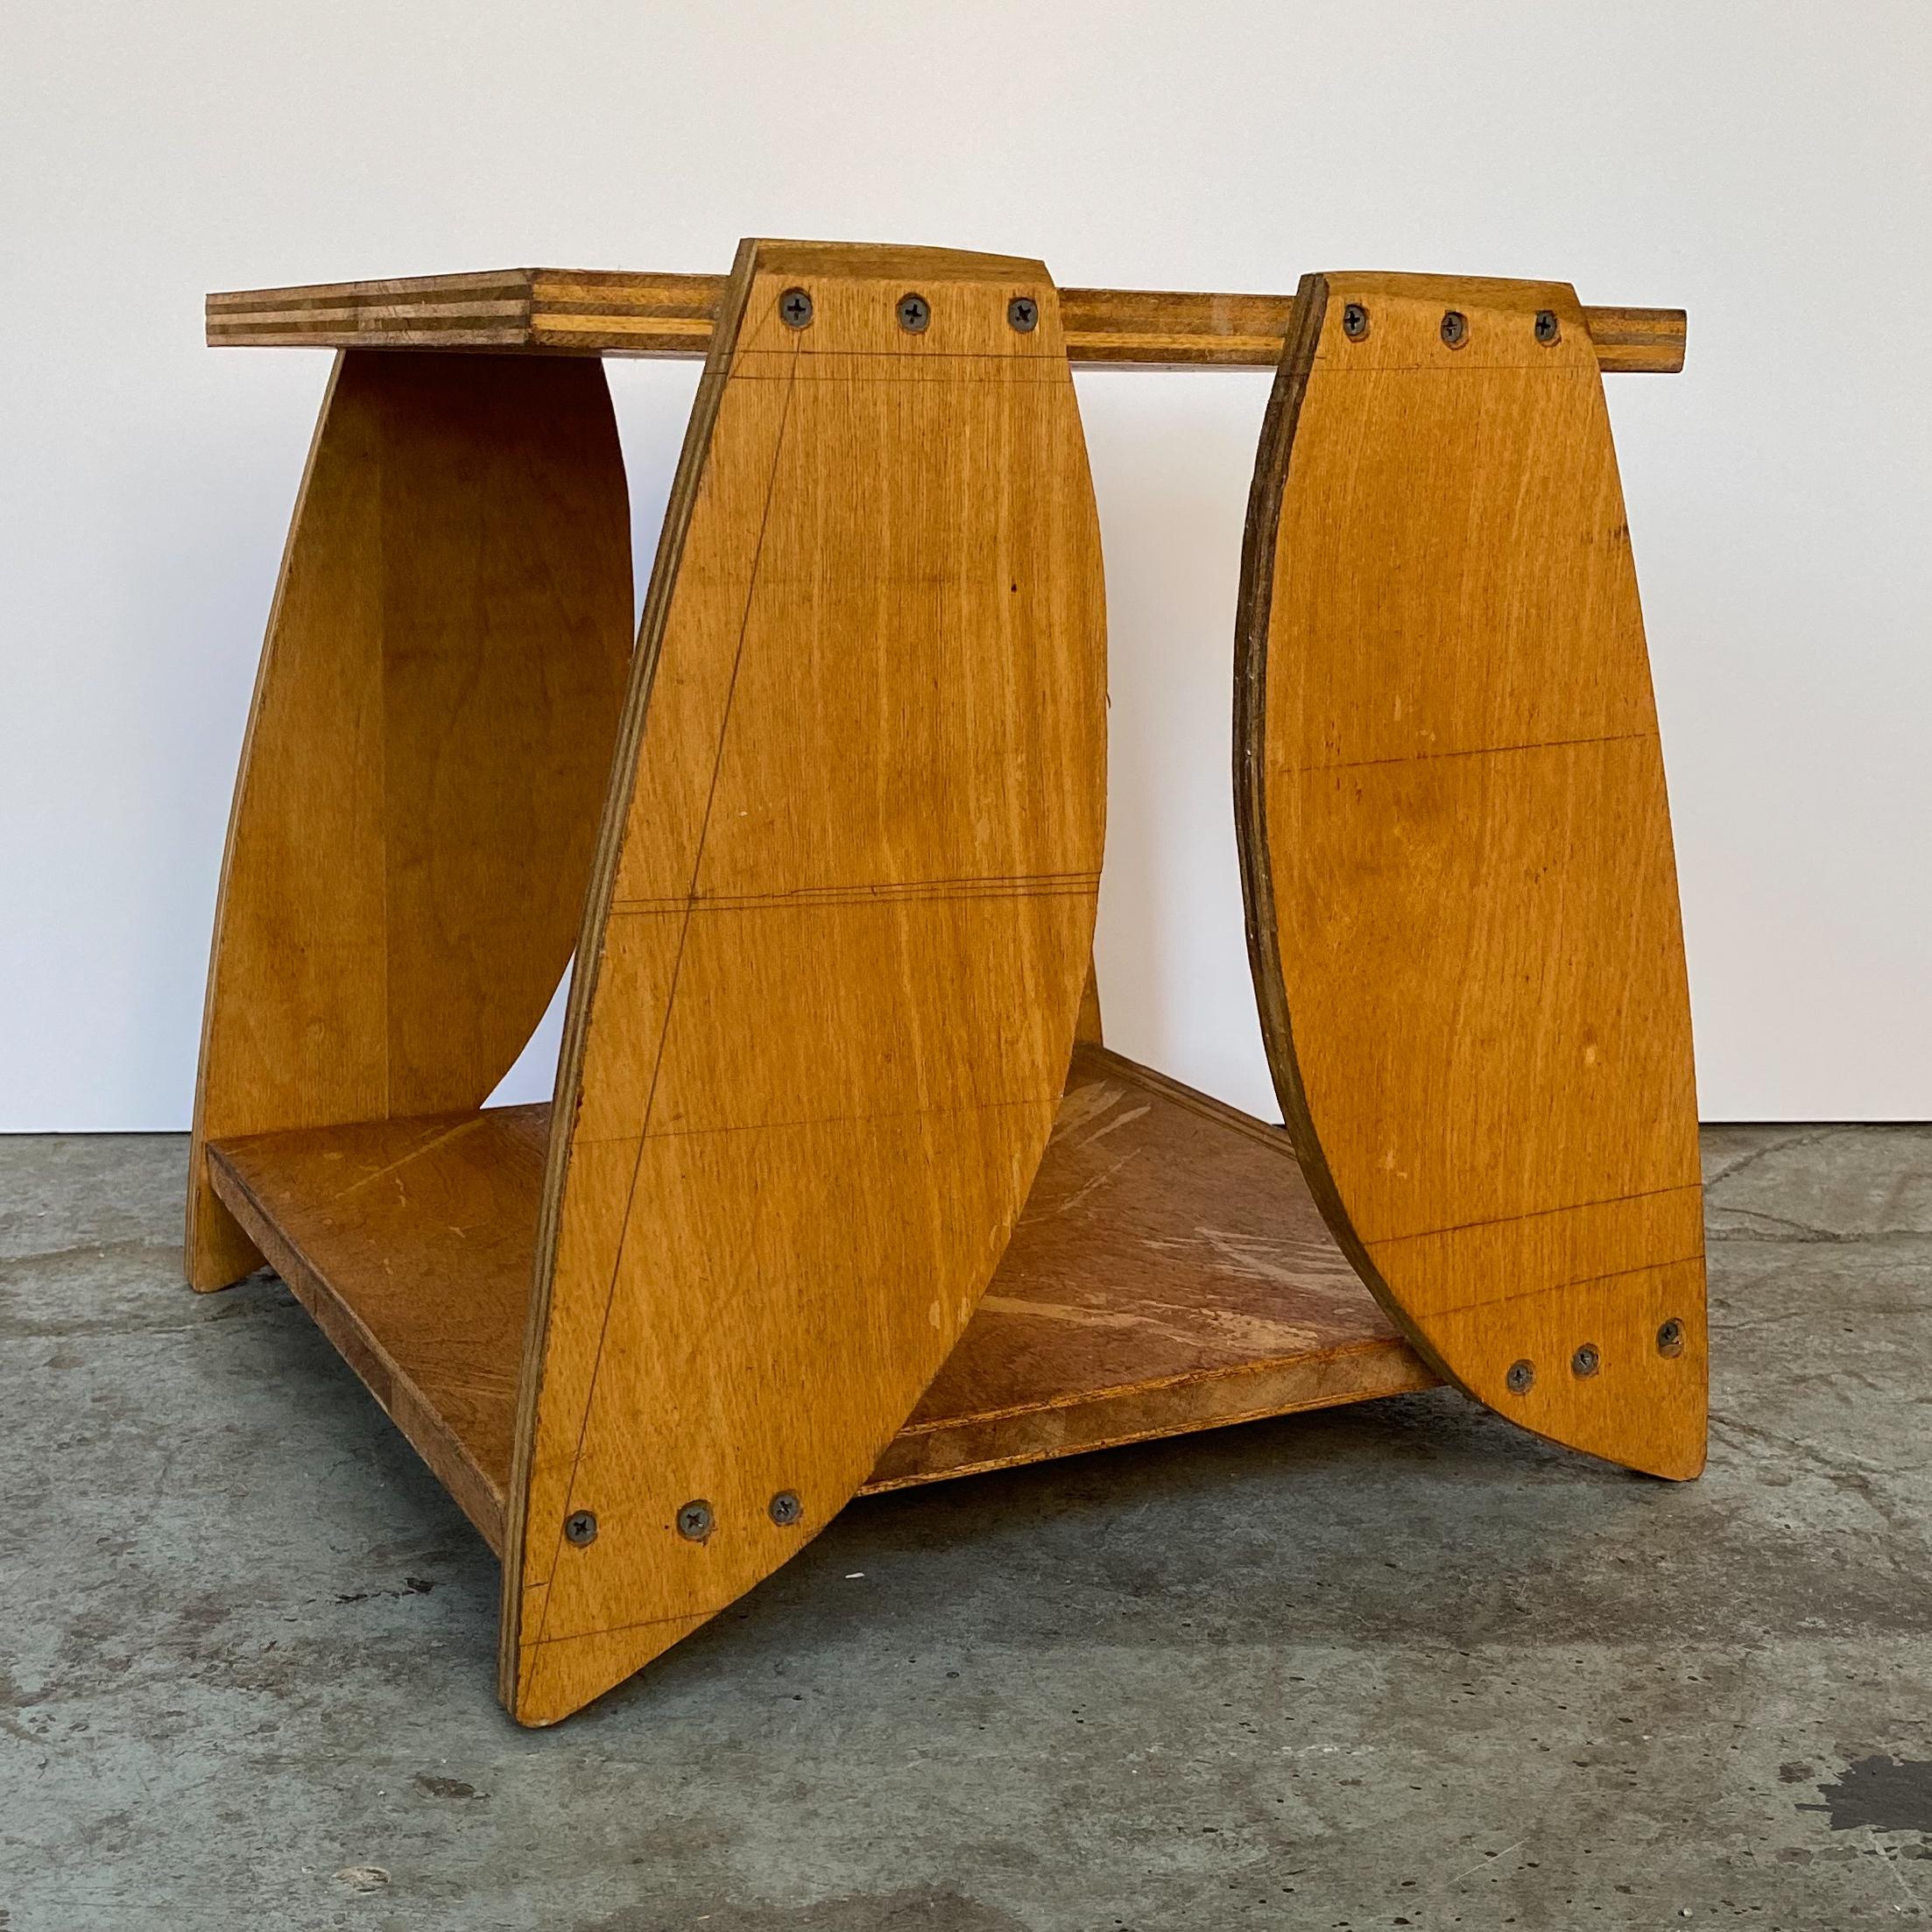 Side table of birch plywood with shaped and cut plywood legs. A home construction project by Japanese or American artist Reiji Kimura, made for his own residence, circa 1970s. Kimura was educated in Japan but moved to New York City in 1956 and was